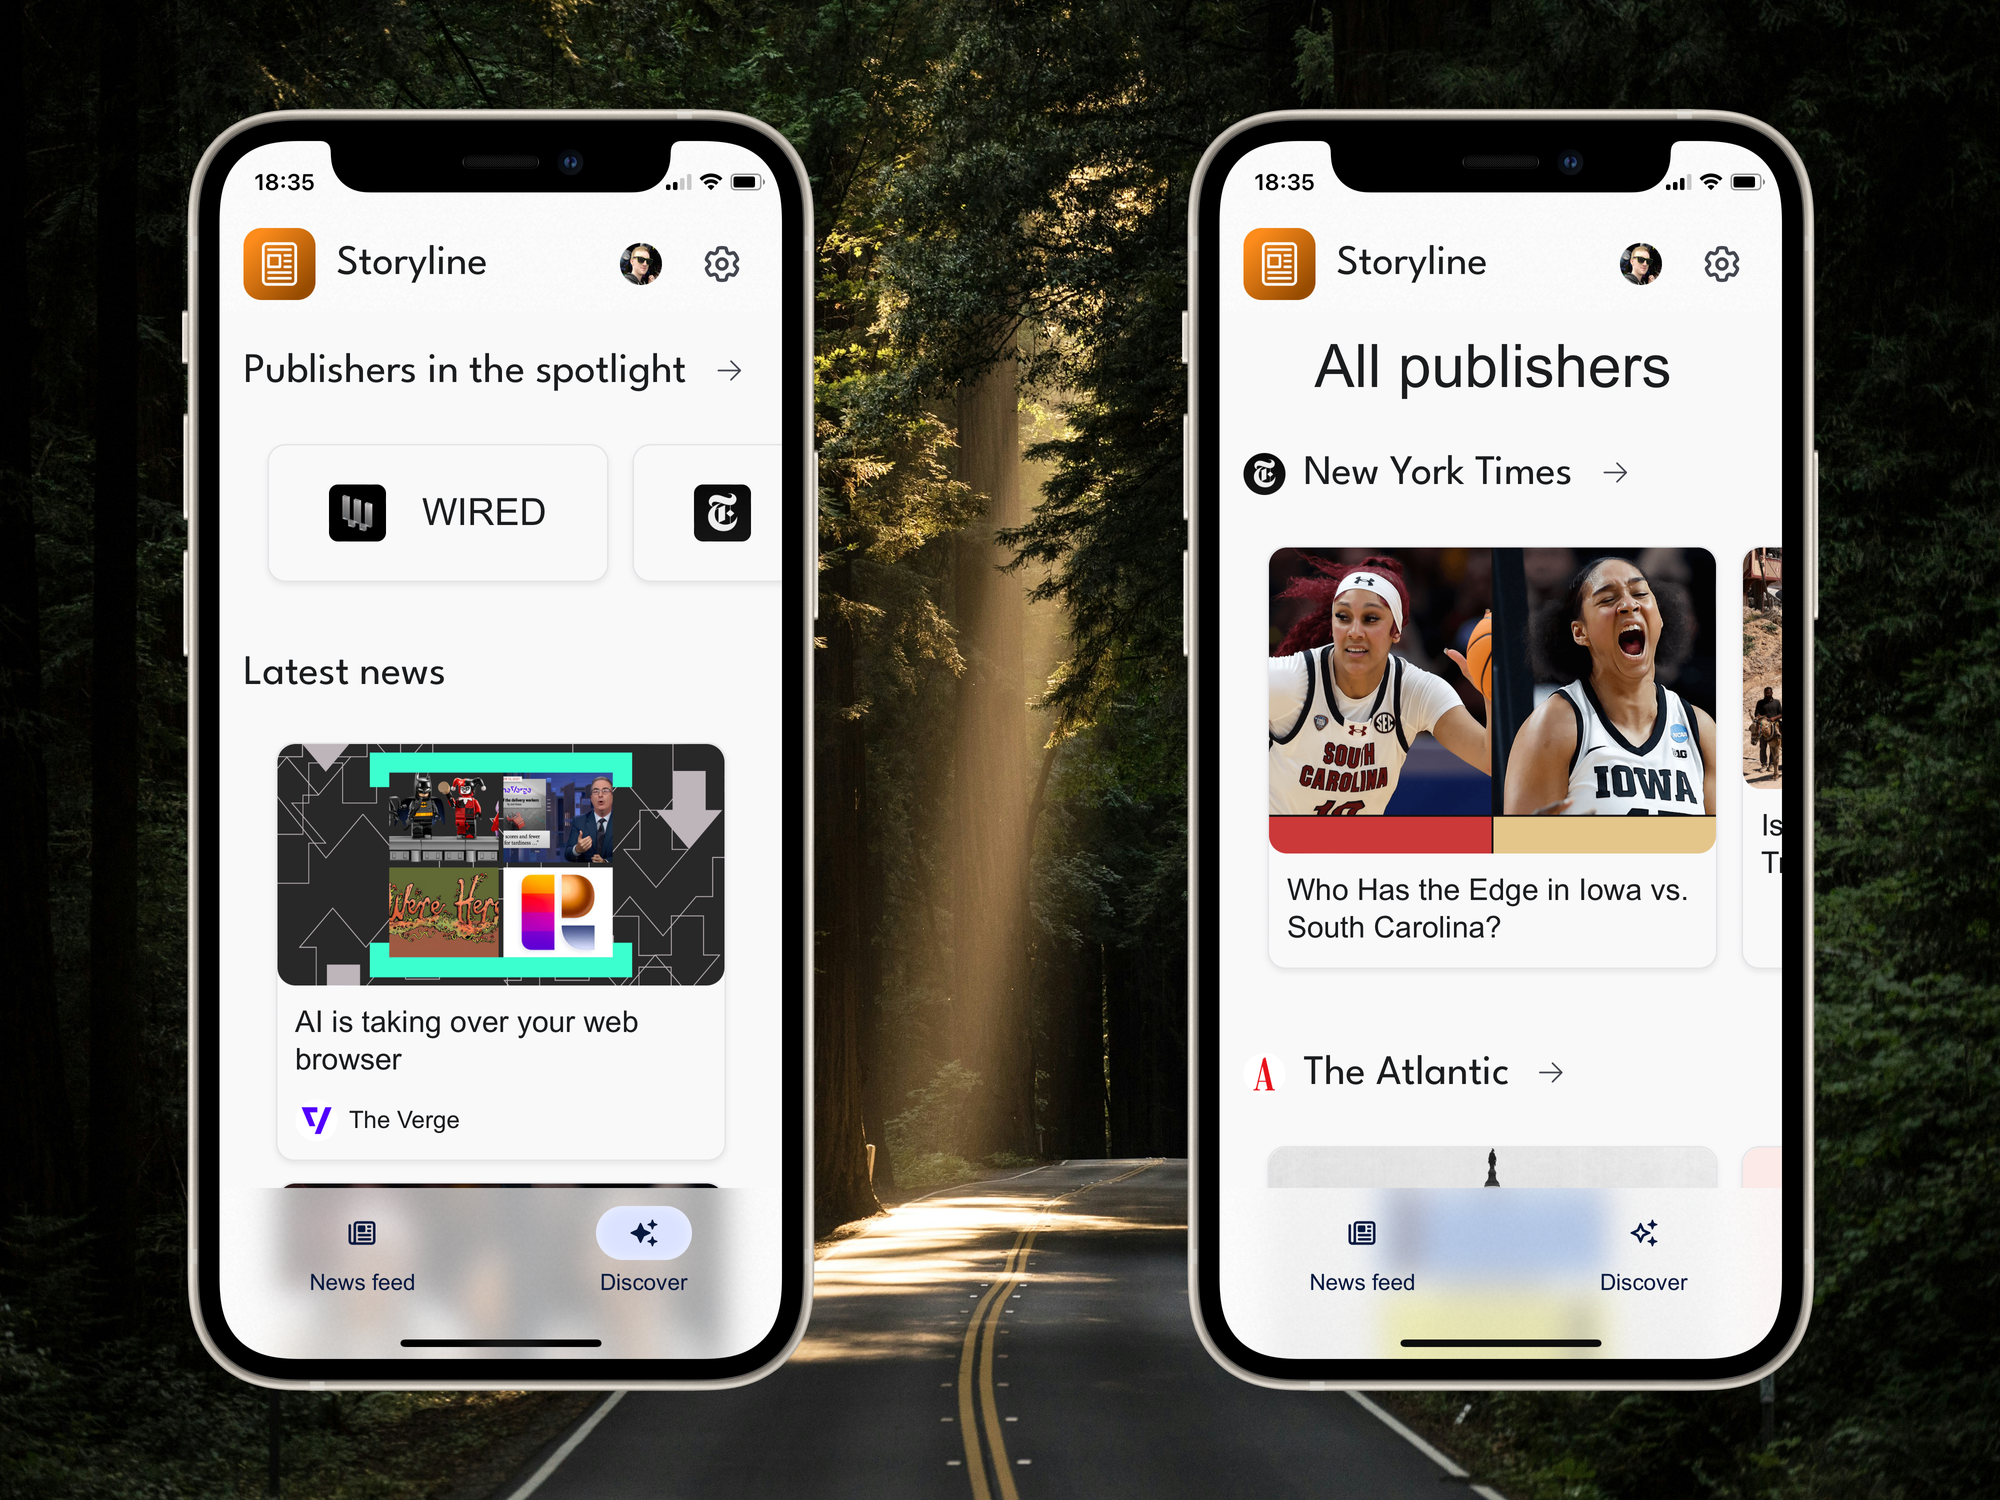 Introducing Storyline, the one place to get all your news